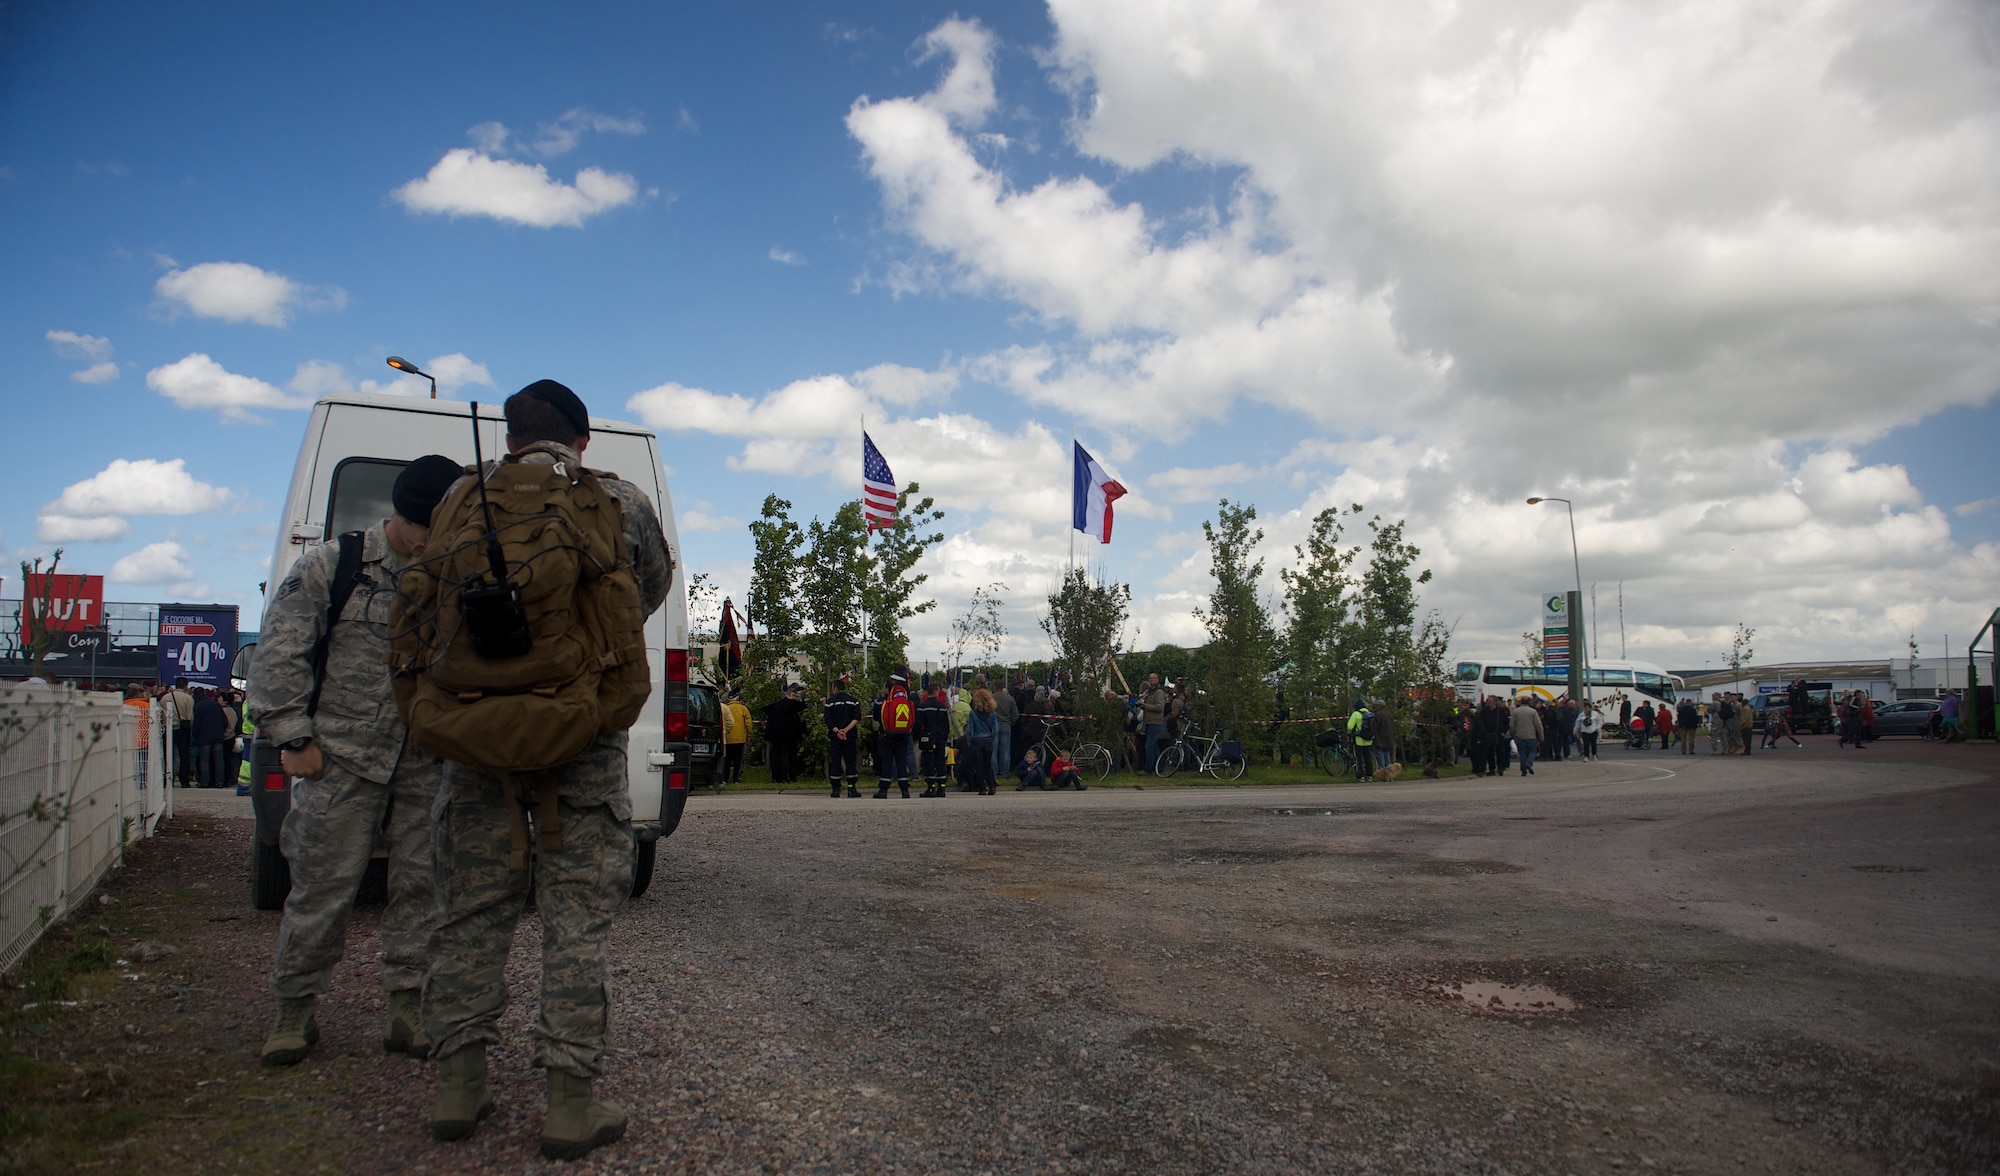 Tech. Sgt. Zachary Jacobs, front, and Senior Airman Jason Hoff coordinate a flyover behind the scenes of a 70th D-Day anniversary wreath laying ceremony, June 4, 2014, in Carentan, France. Jacobs and Hoff are joint terminal attack controllers with the 116th Air Support Operations Squadron, Washington. TACPs deploy with Soldiers to provide air support for operations on the ground. (U.S. Air Force photo/Senior Airman Alexander W. Riedel)